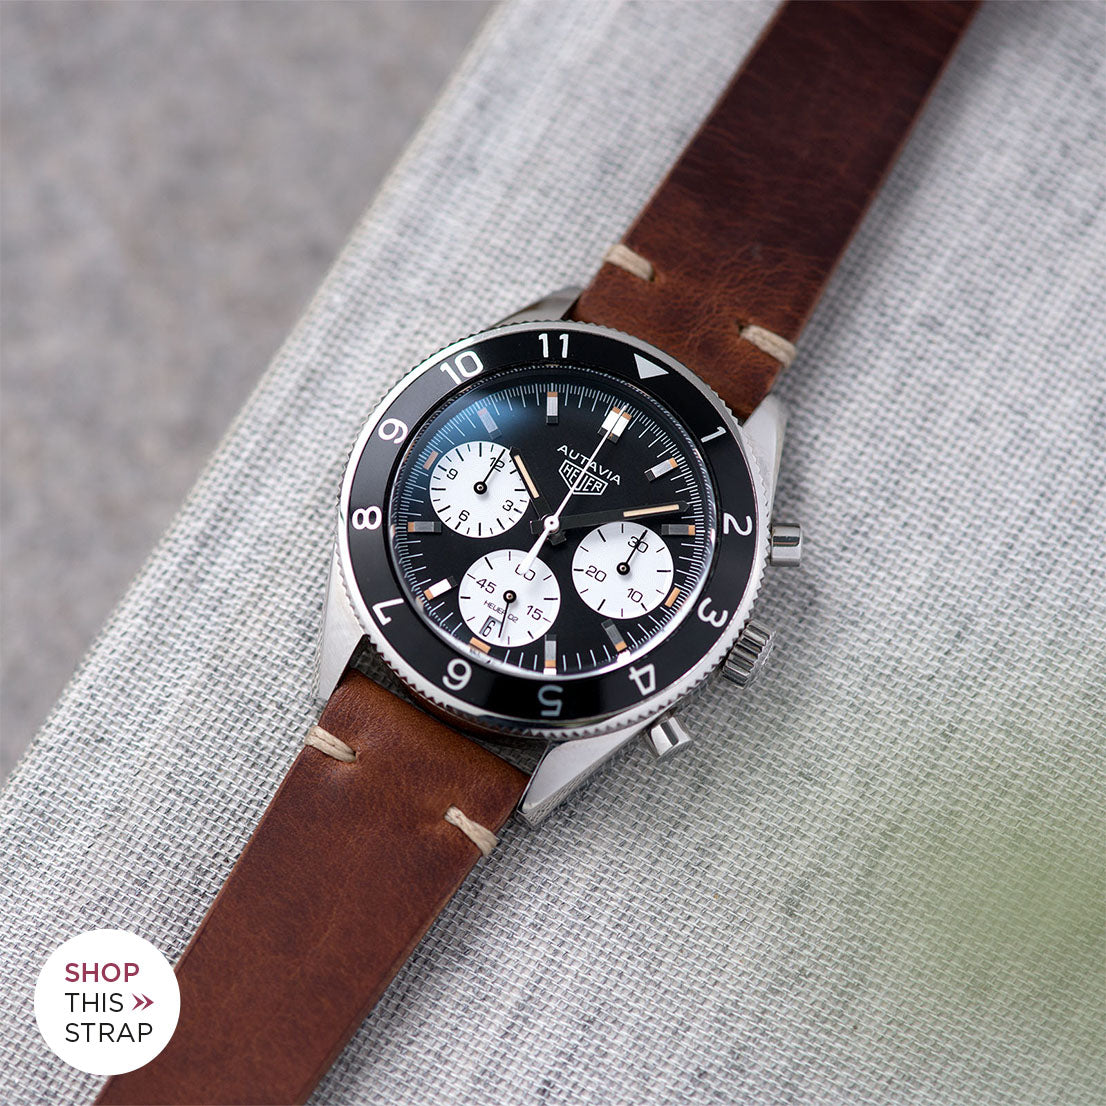 Bulang and Sons_Strap Guide_The Tag Heuer Autavia_Siena Brown Leather Watch Strap